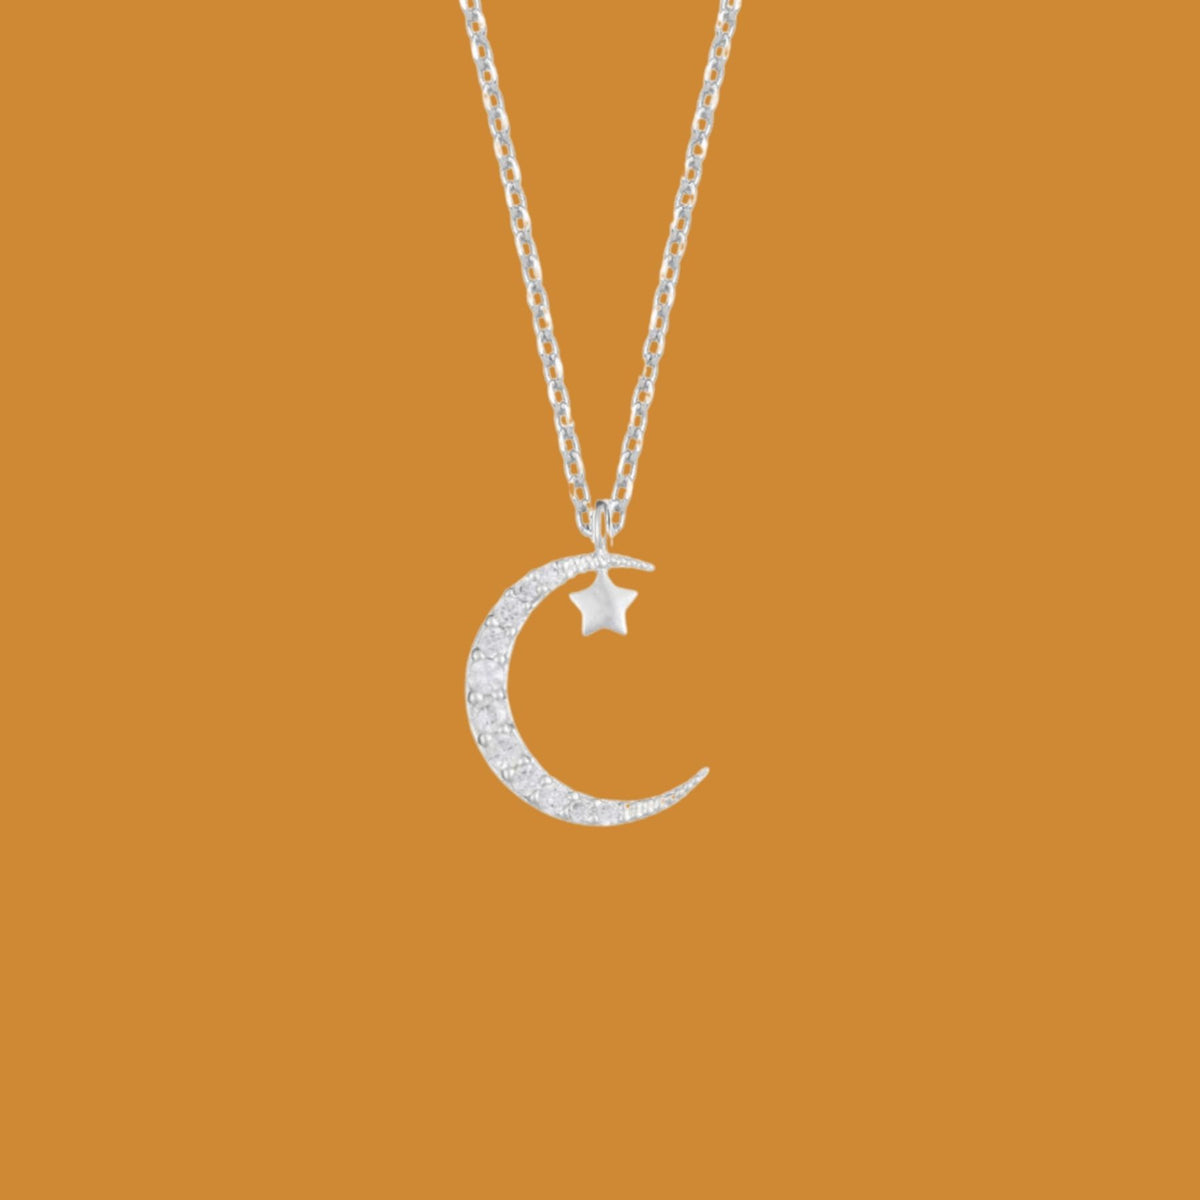 Moon and Star Charm Necklace - Elisa Solomon Jewelry